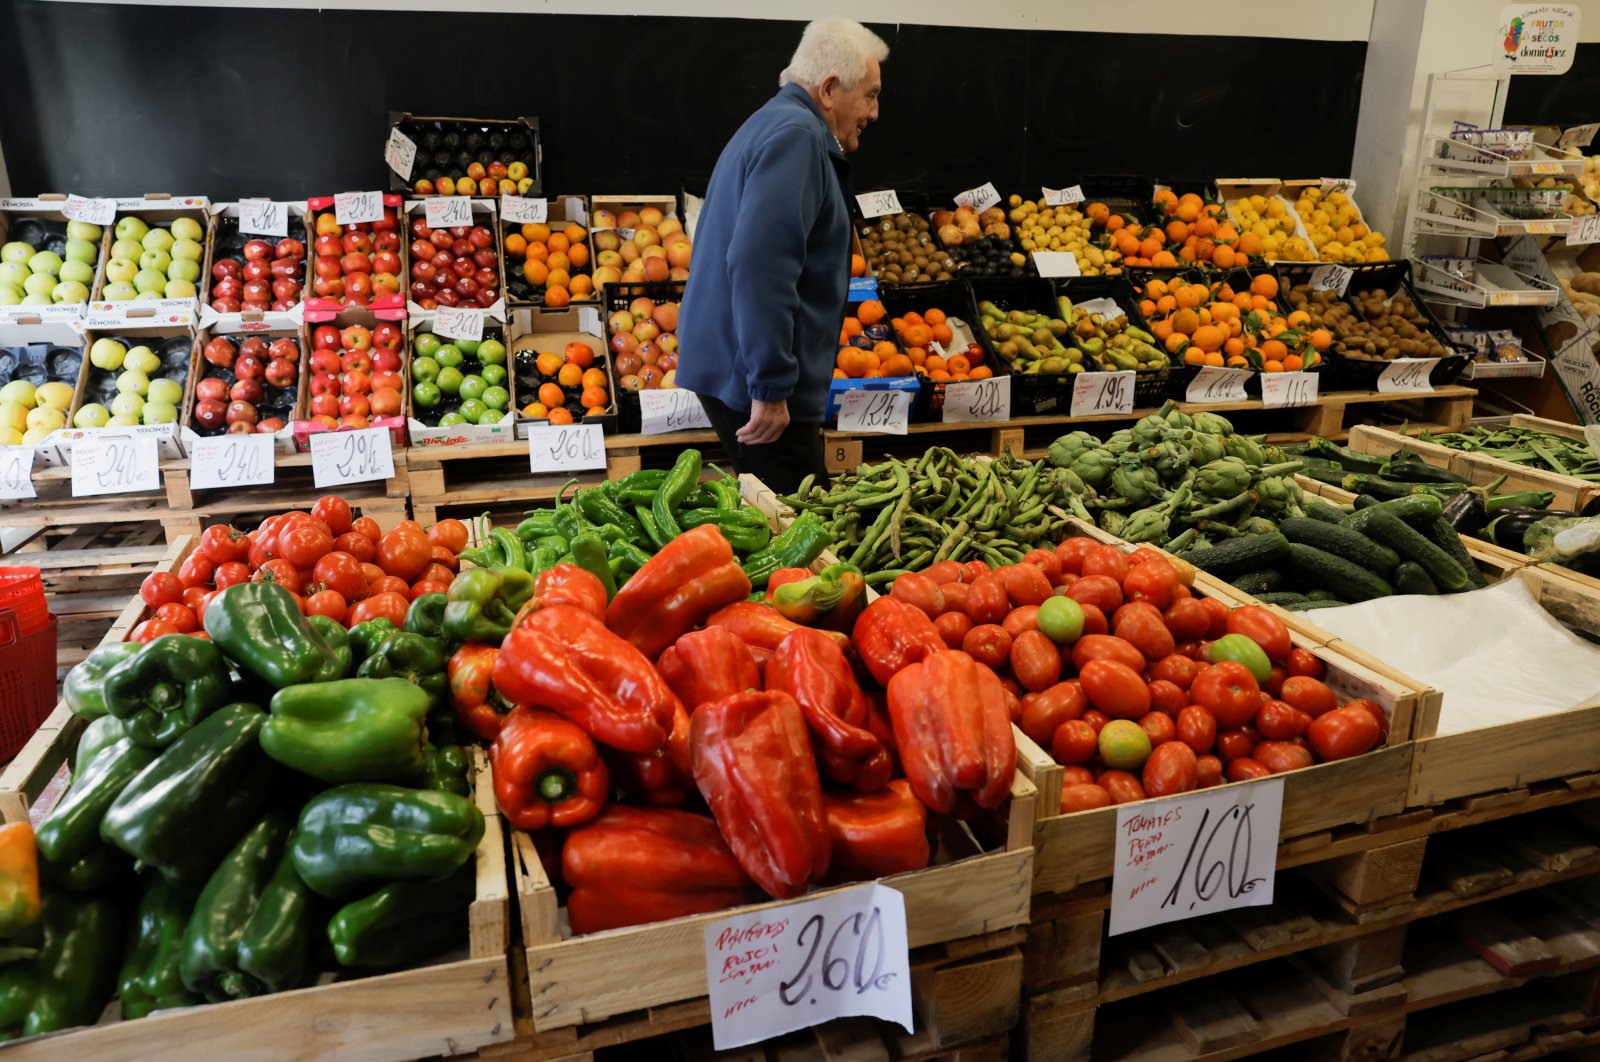 A customer walks between fruits and vegetables displayed in boxes at a fruit store as the Spanish government announces measures to battle inflation, in Ronda, Spain, Dec. 27, 2022. (Reuters Photo)